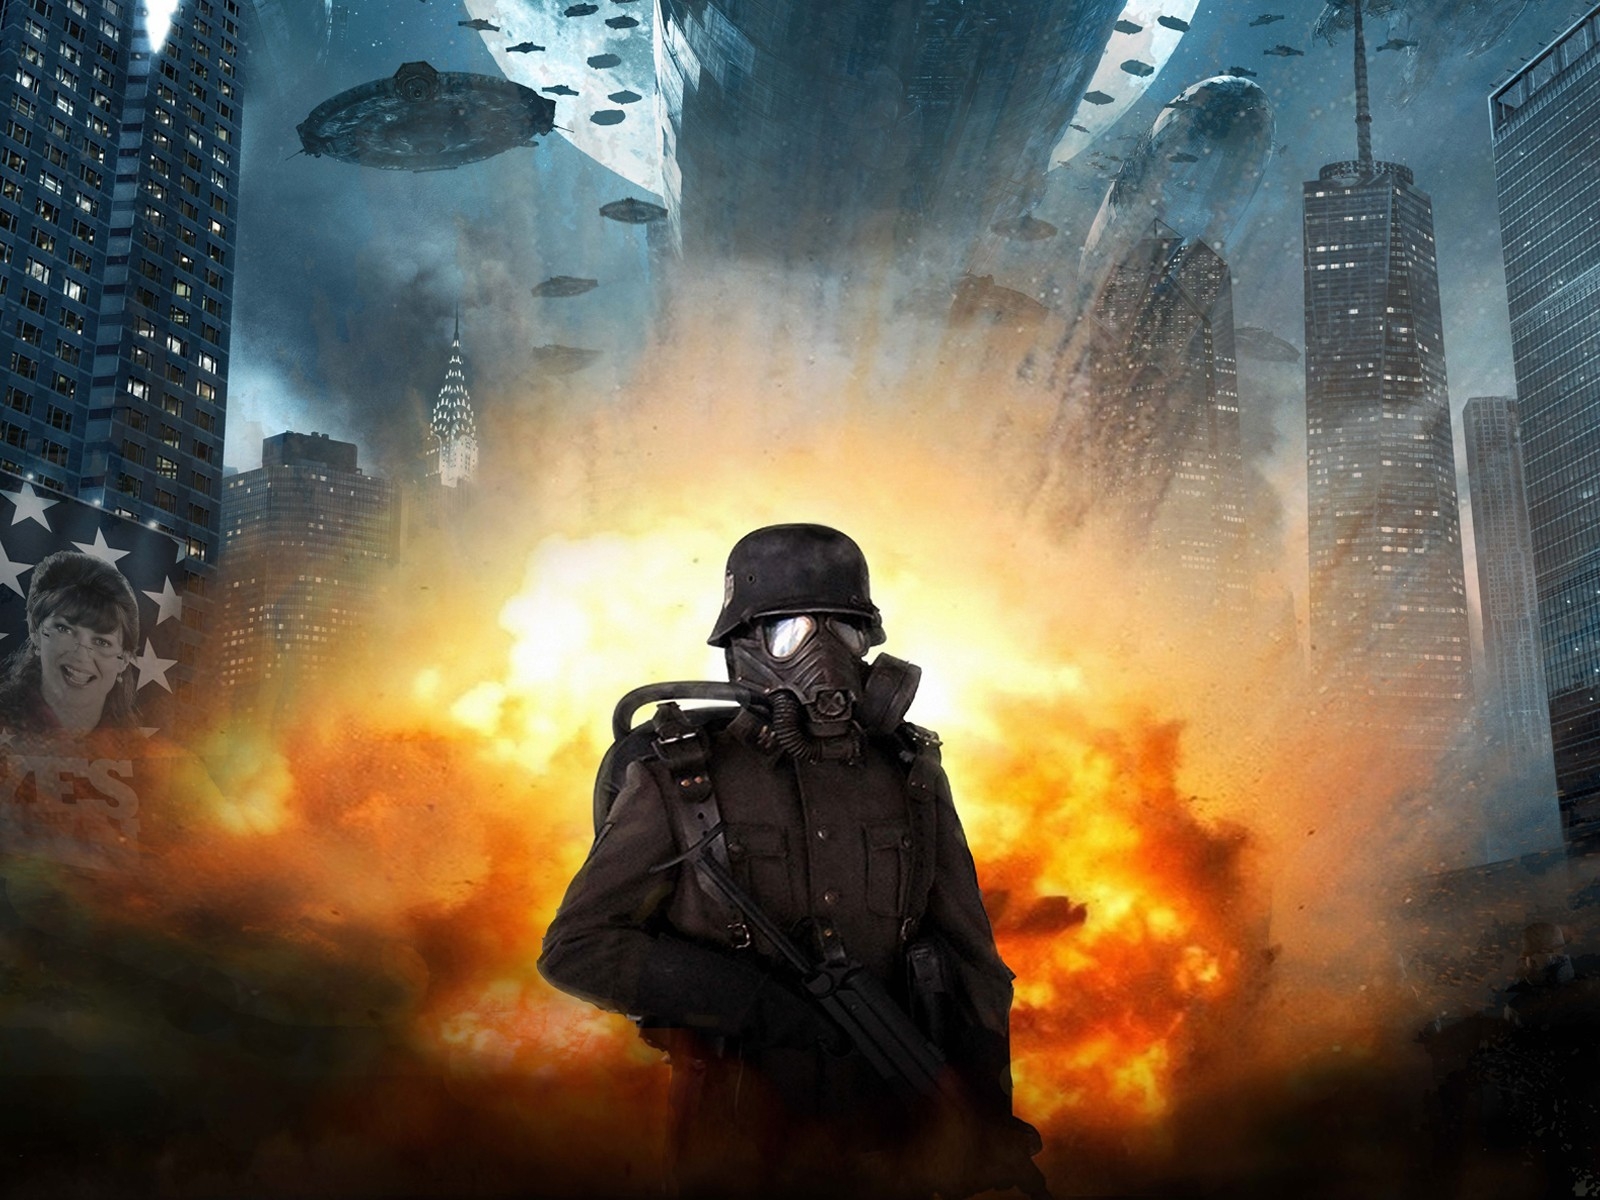 Iron Sky Soldier for 1600 x 1200 resolution